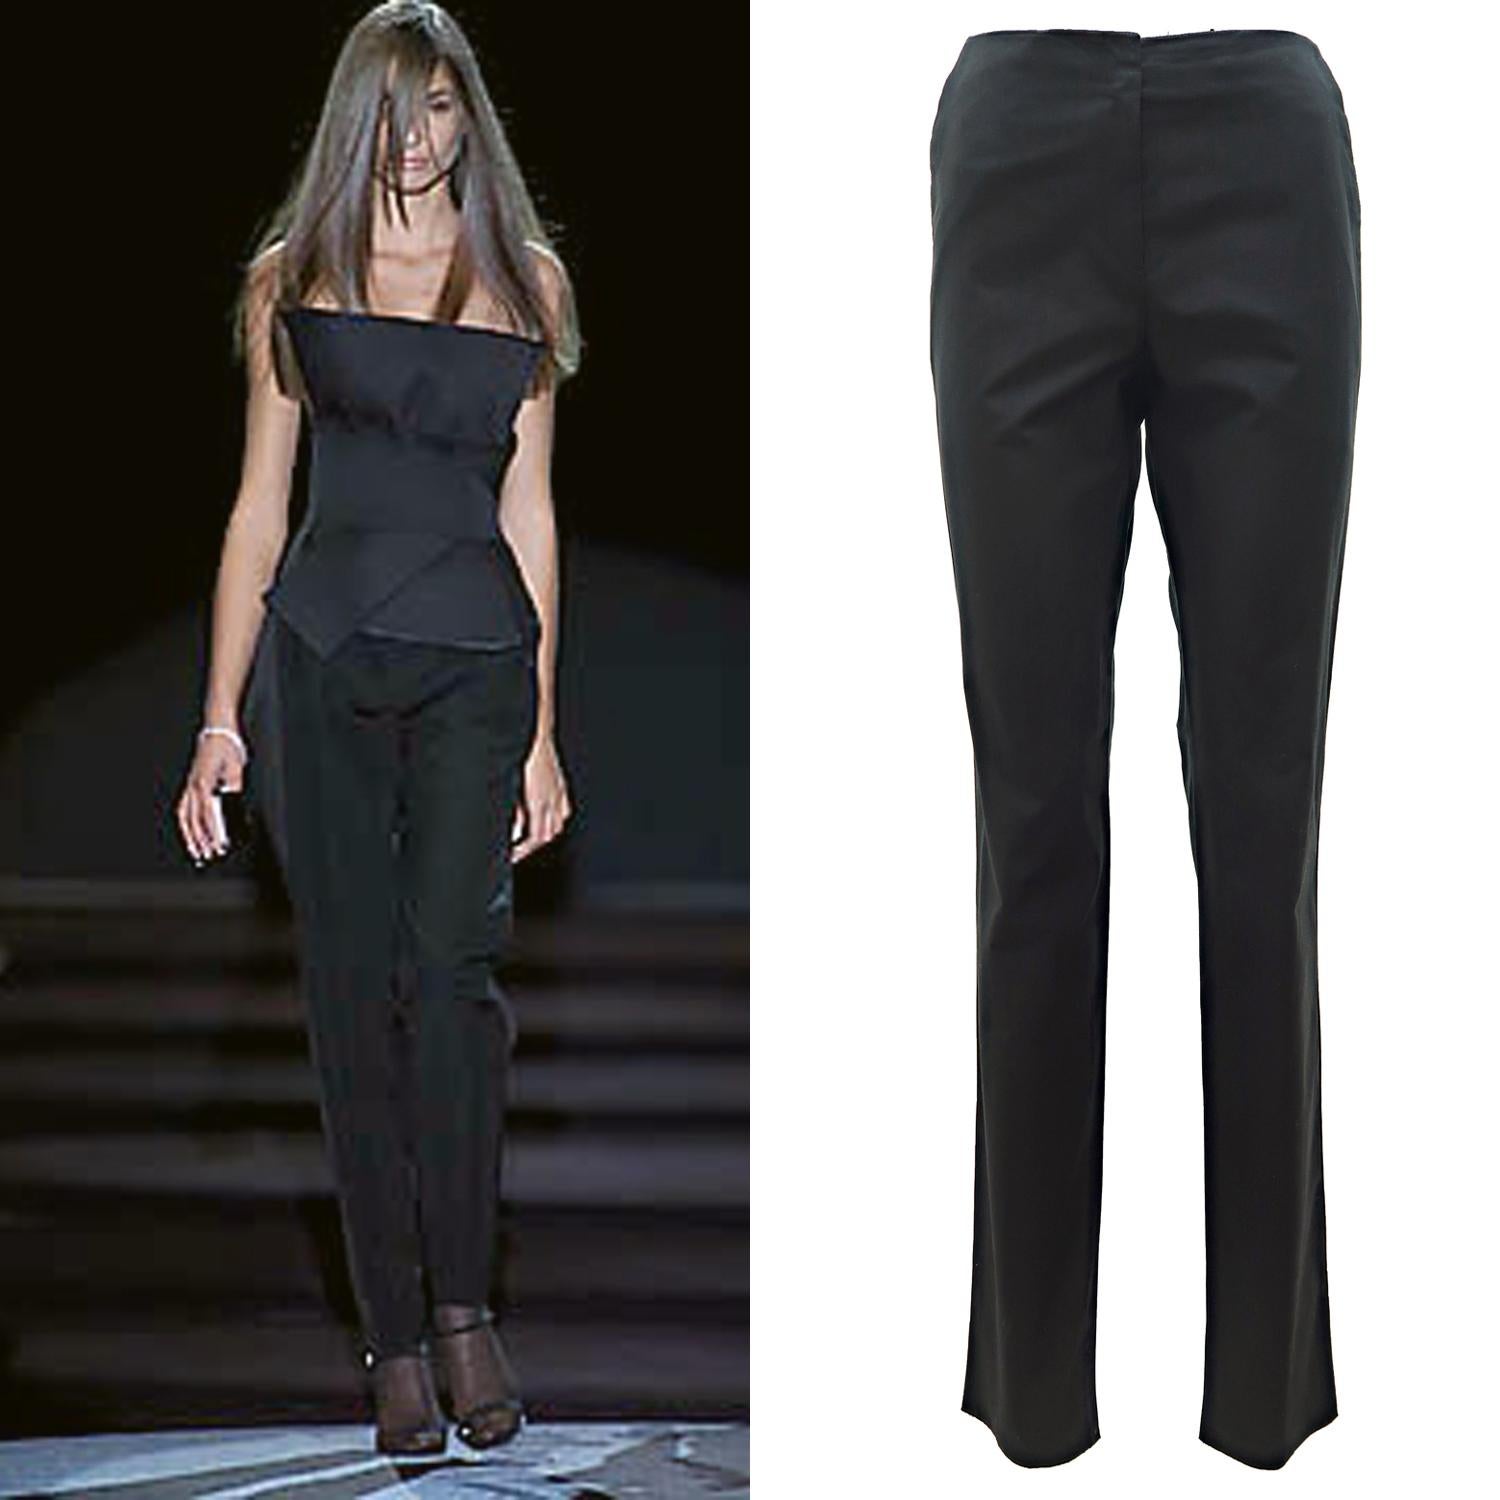 Yves Saint Laurent by Tom Ford FW-2001 Tailored Silhouette Cotton Pants For Sale 4